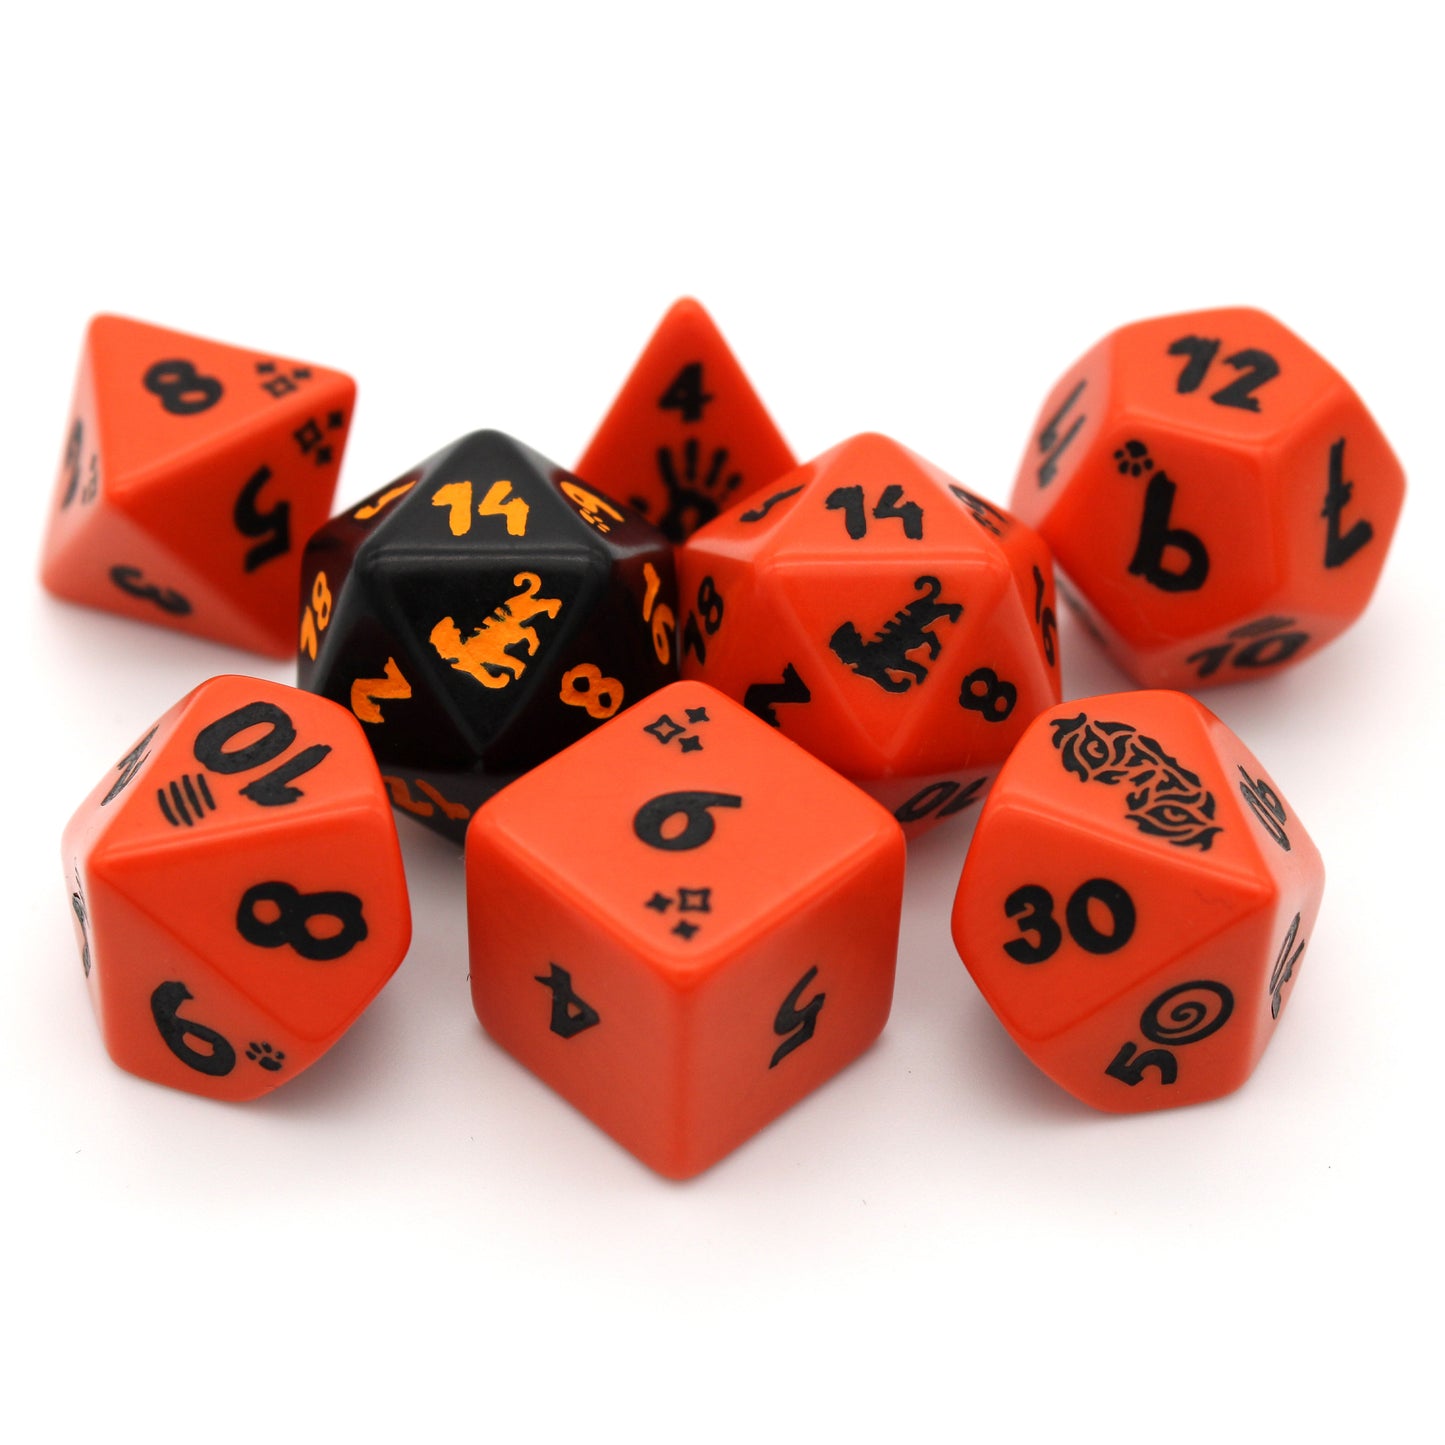 Bengal is an 8-piece engraved acrylic set in burning bright orange with tiger transformation icons inked in pitch black. Included is an alternate d20 in reverse colors.